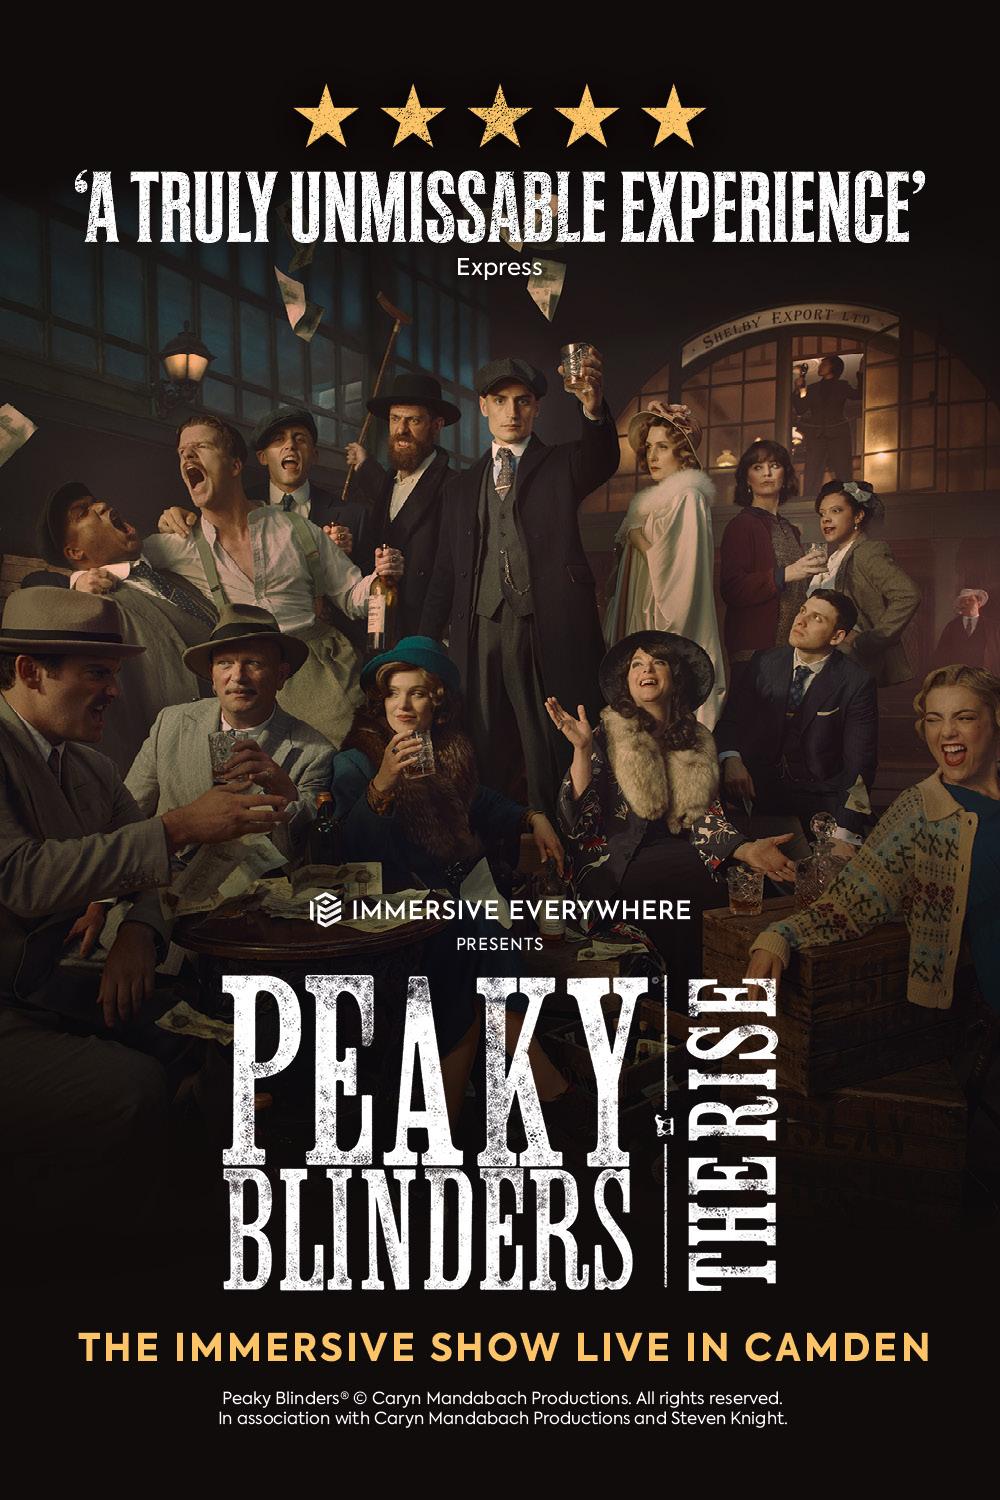 Peaky Blinders: The Rise West End